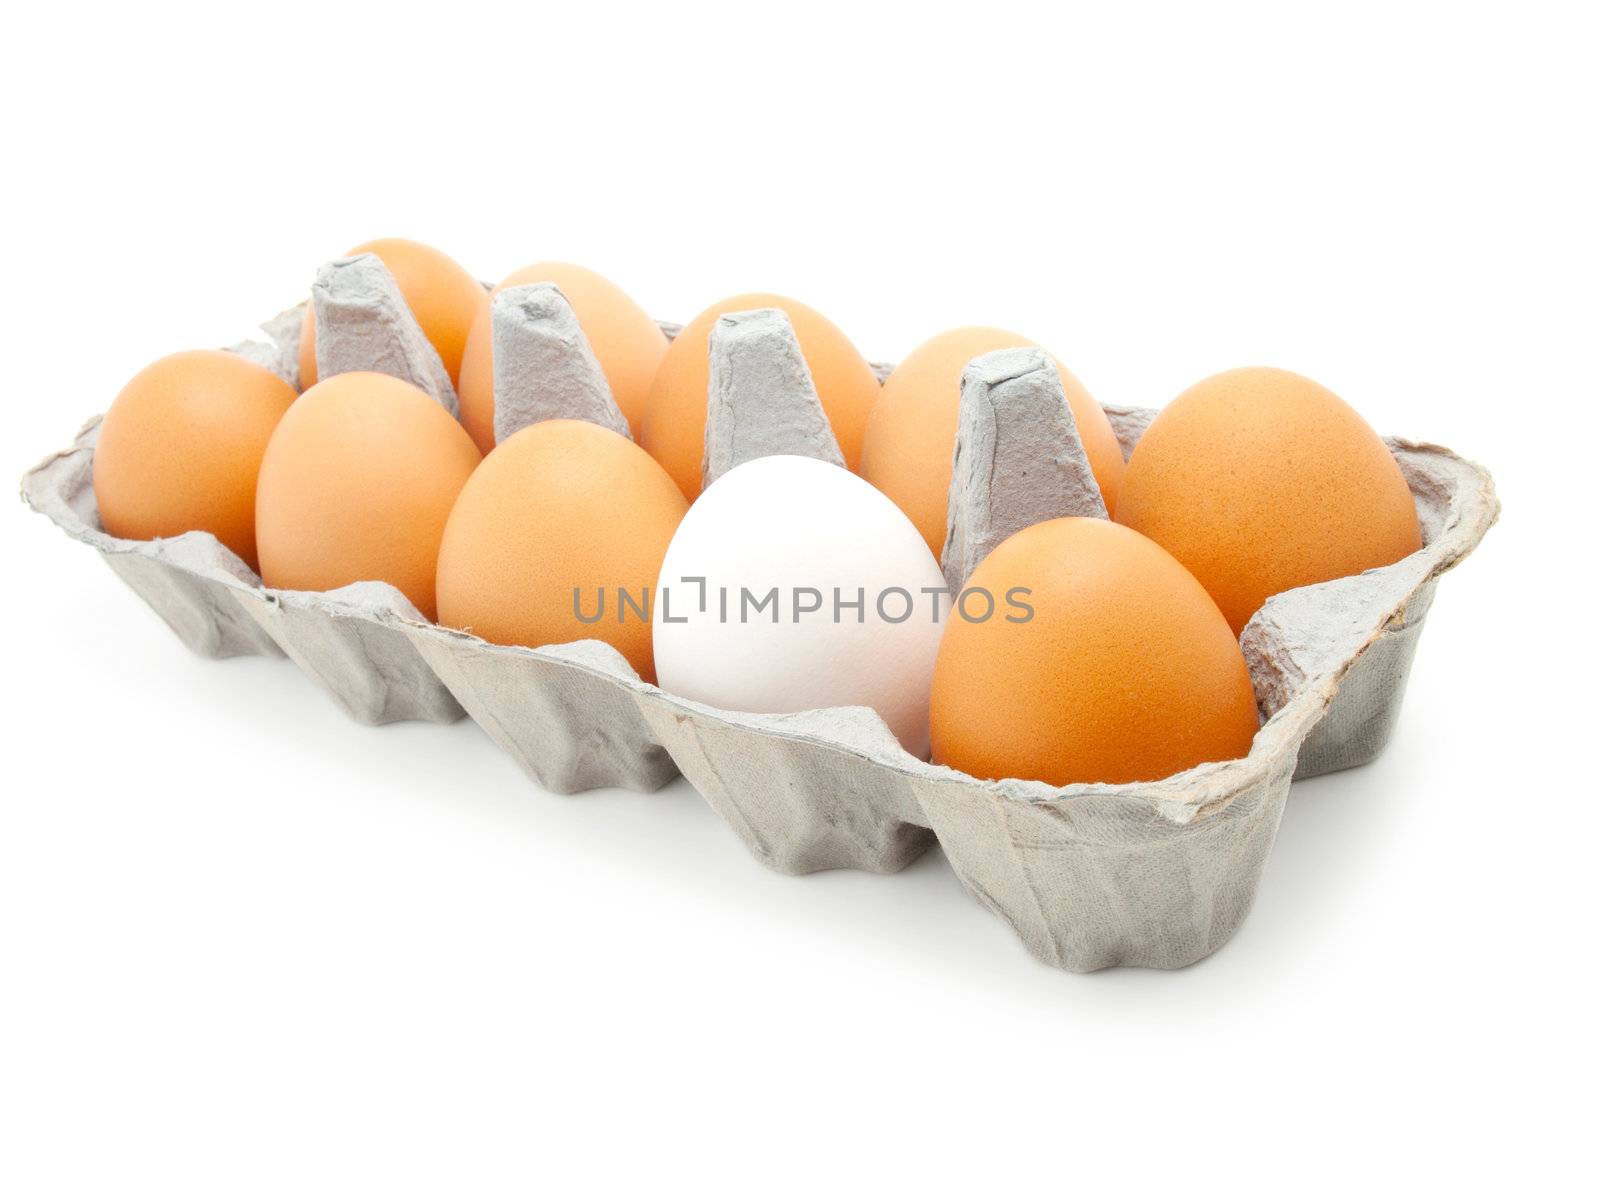 eggs in a carton on white background by motorolka